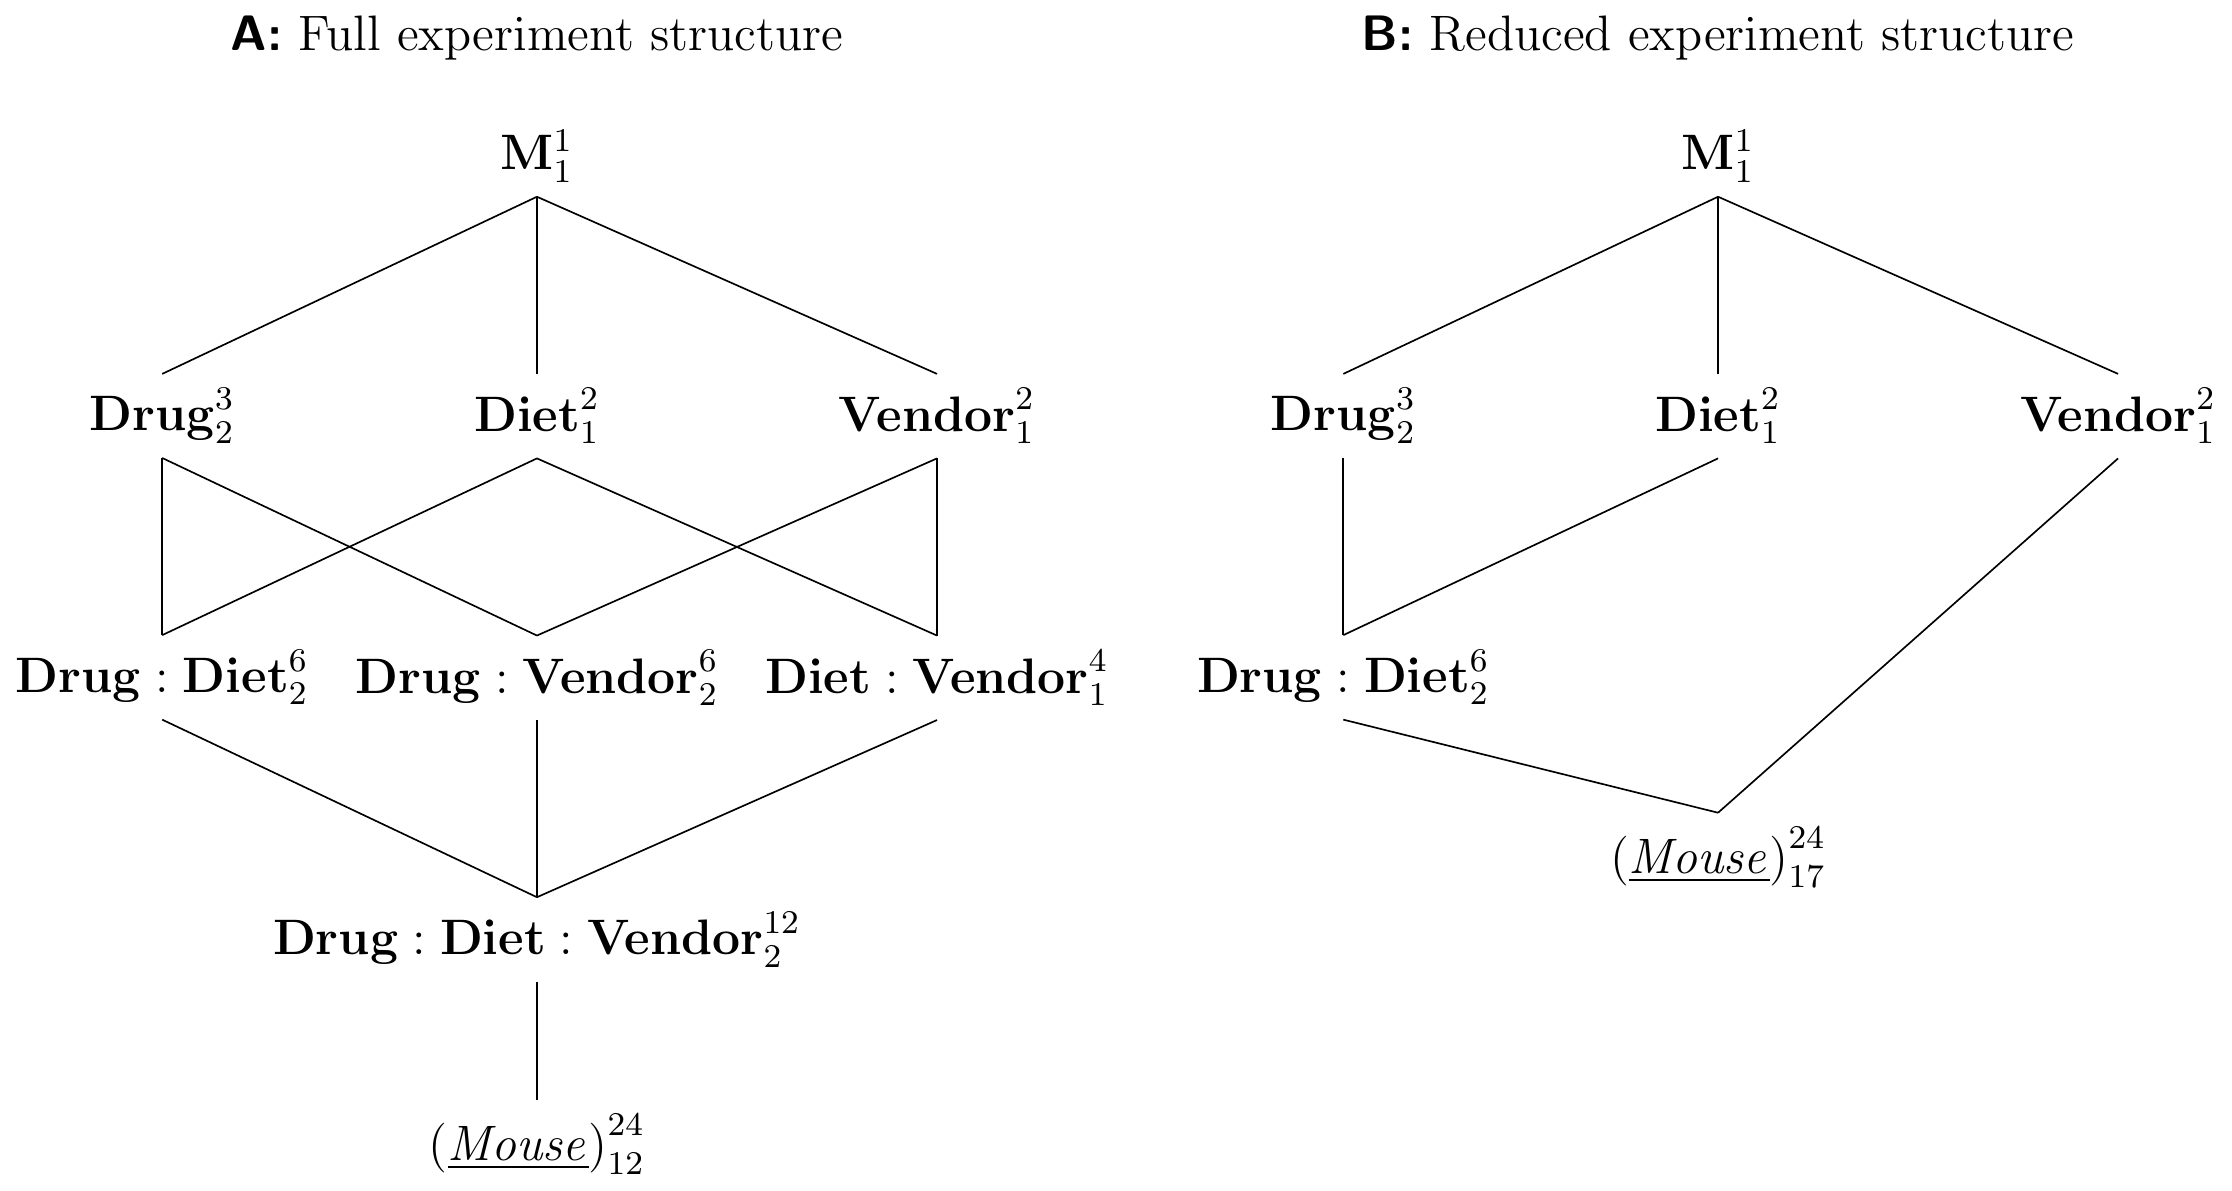 Three-way factorial. A: Full experiment structure with three two-way and one three-way interaction. B: Reduced experiment structure assuming negligible interactions with vendor.